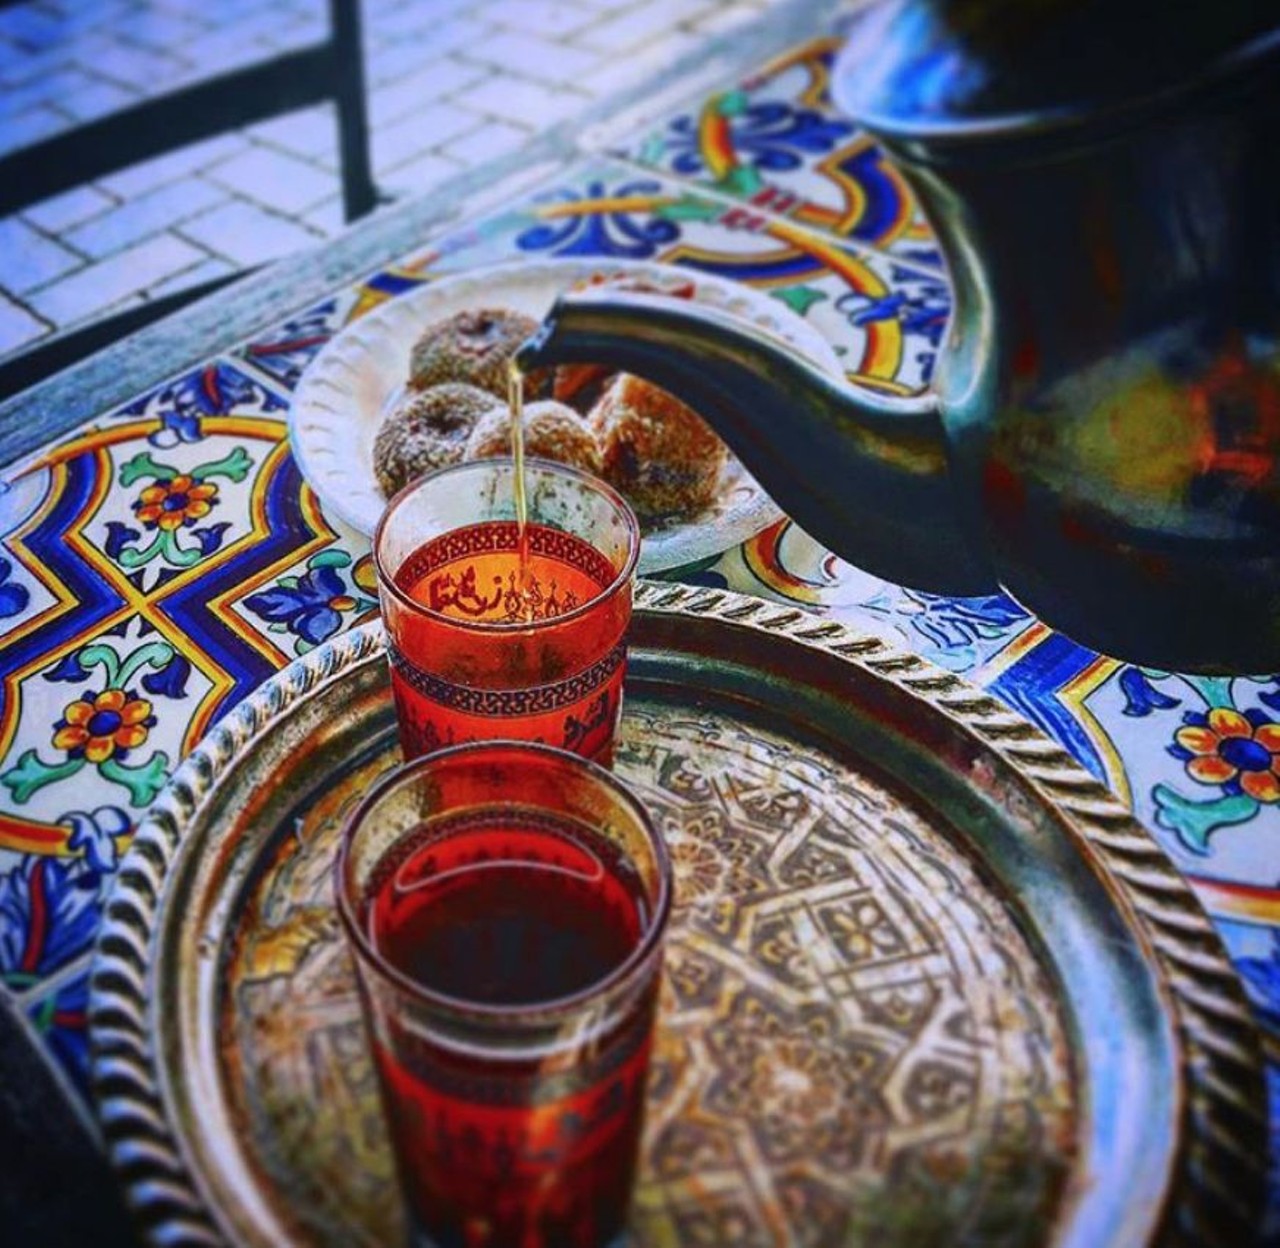 Merguez Restaurant  
11951 International Drive, 407-778-4343
Open seven days a week, this Moroccan restaurant has kebabs, tagines, lamb shank and plenty of mint tea to wash it all down.
Photo via tri_mo/ Instagram